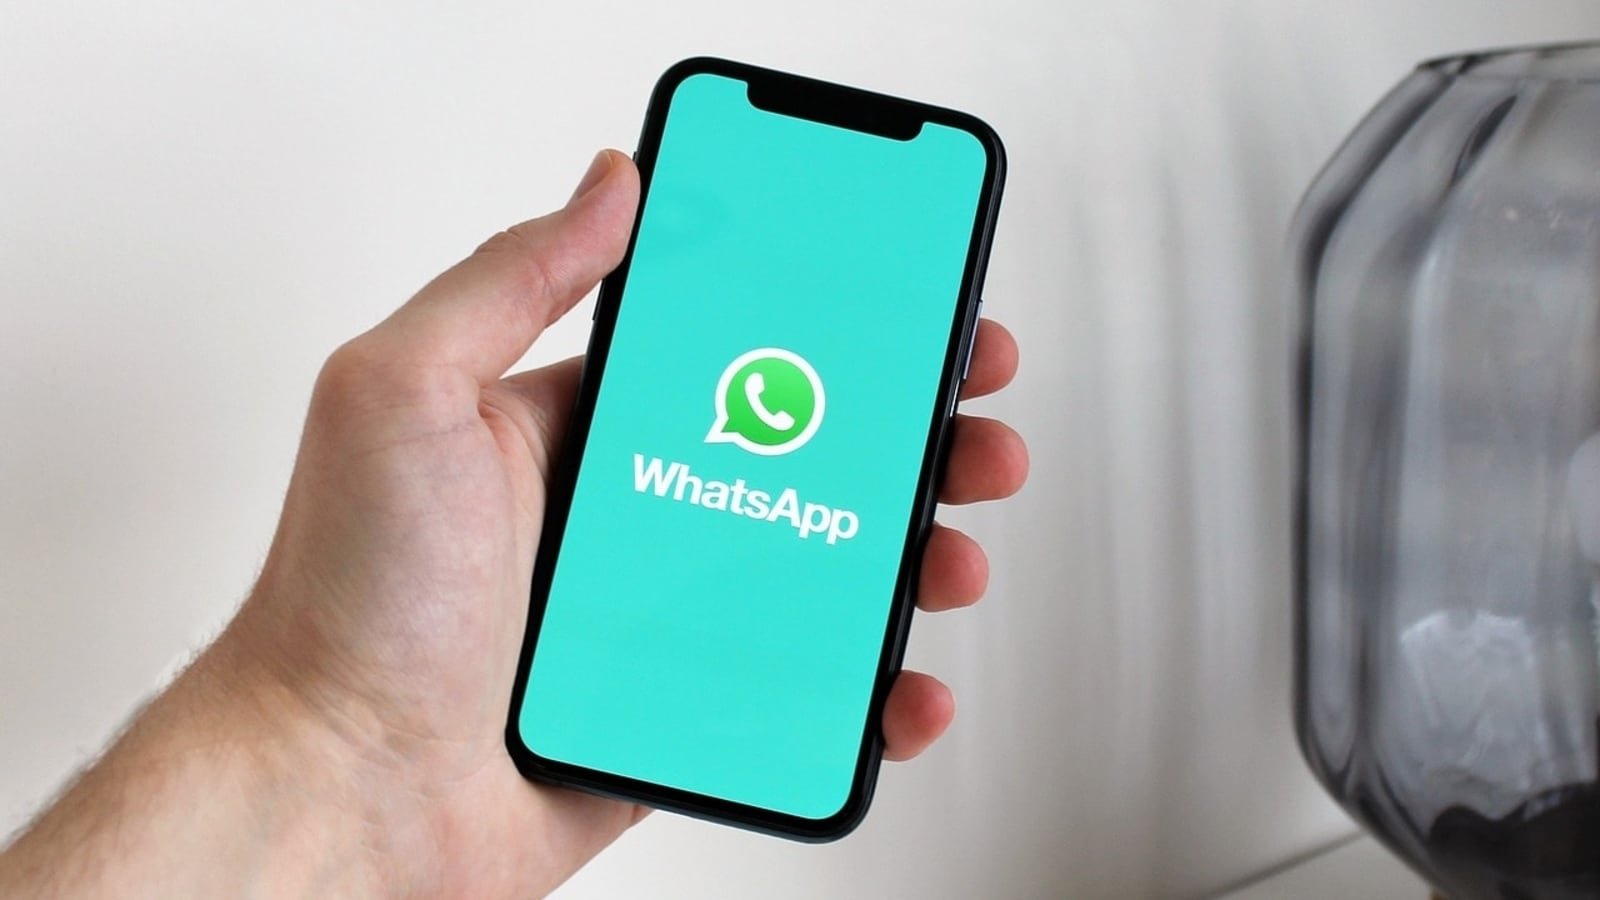 WhatsApp Web to introduce 'Favourites' filter for quick access to chats; Know what is coming